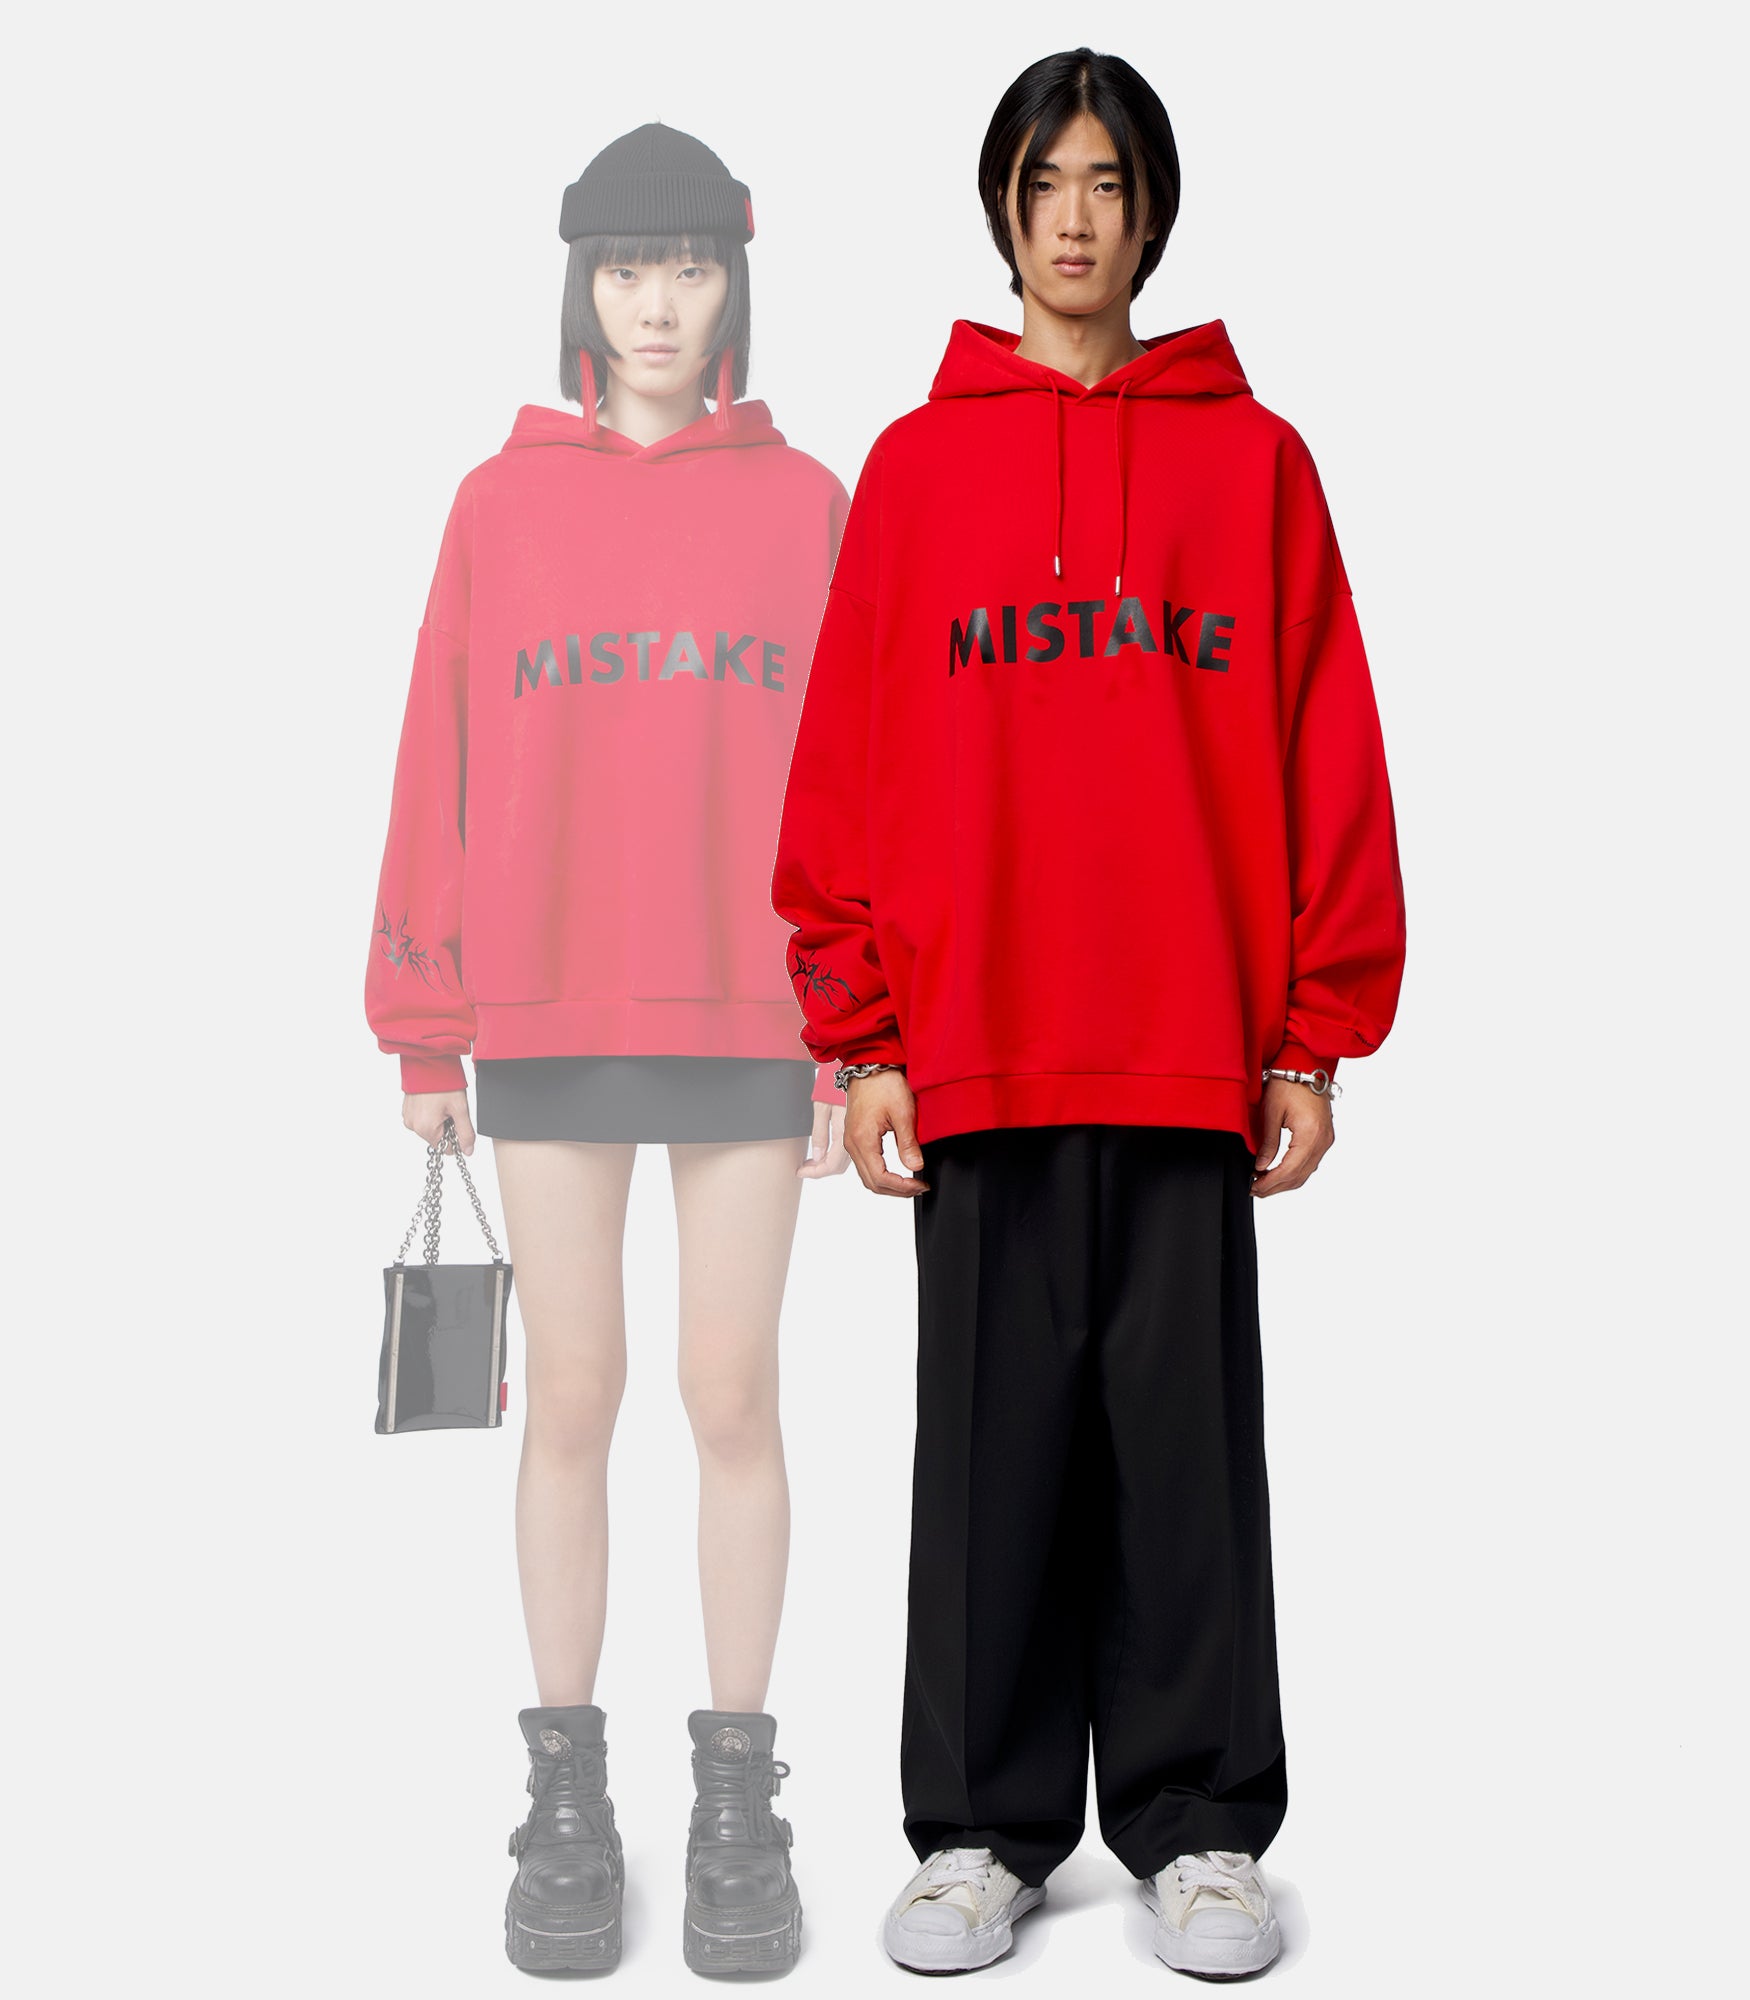 Ares Oversize Hoodie